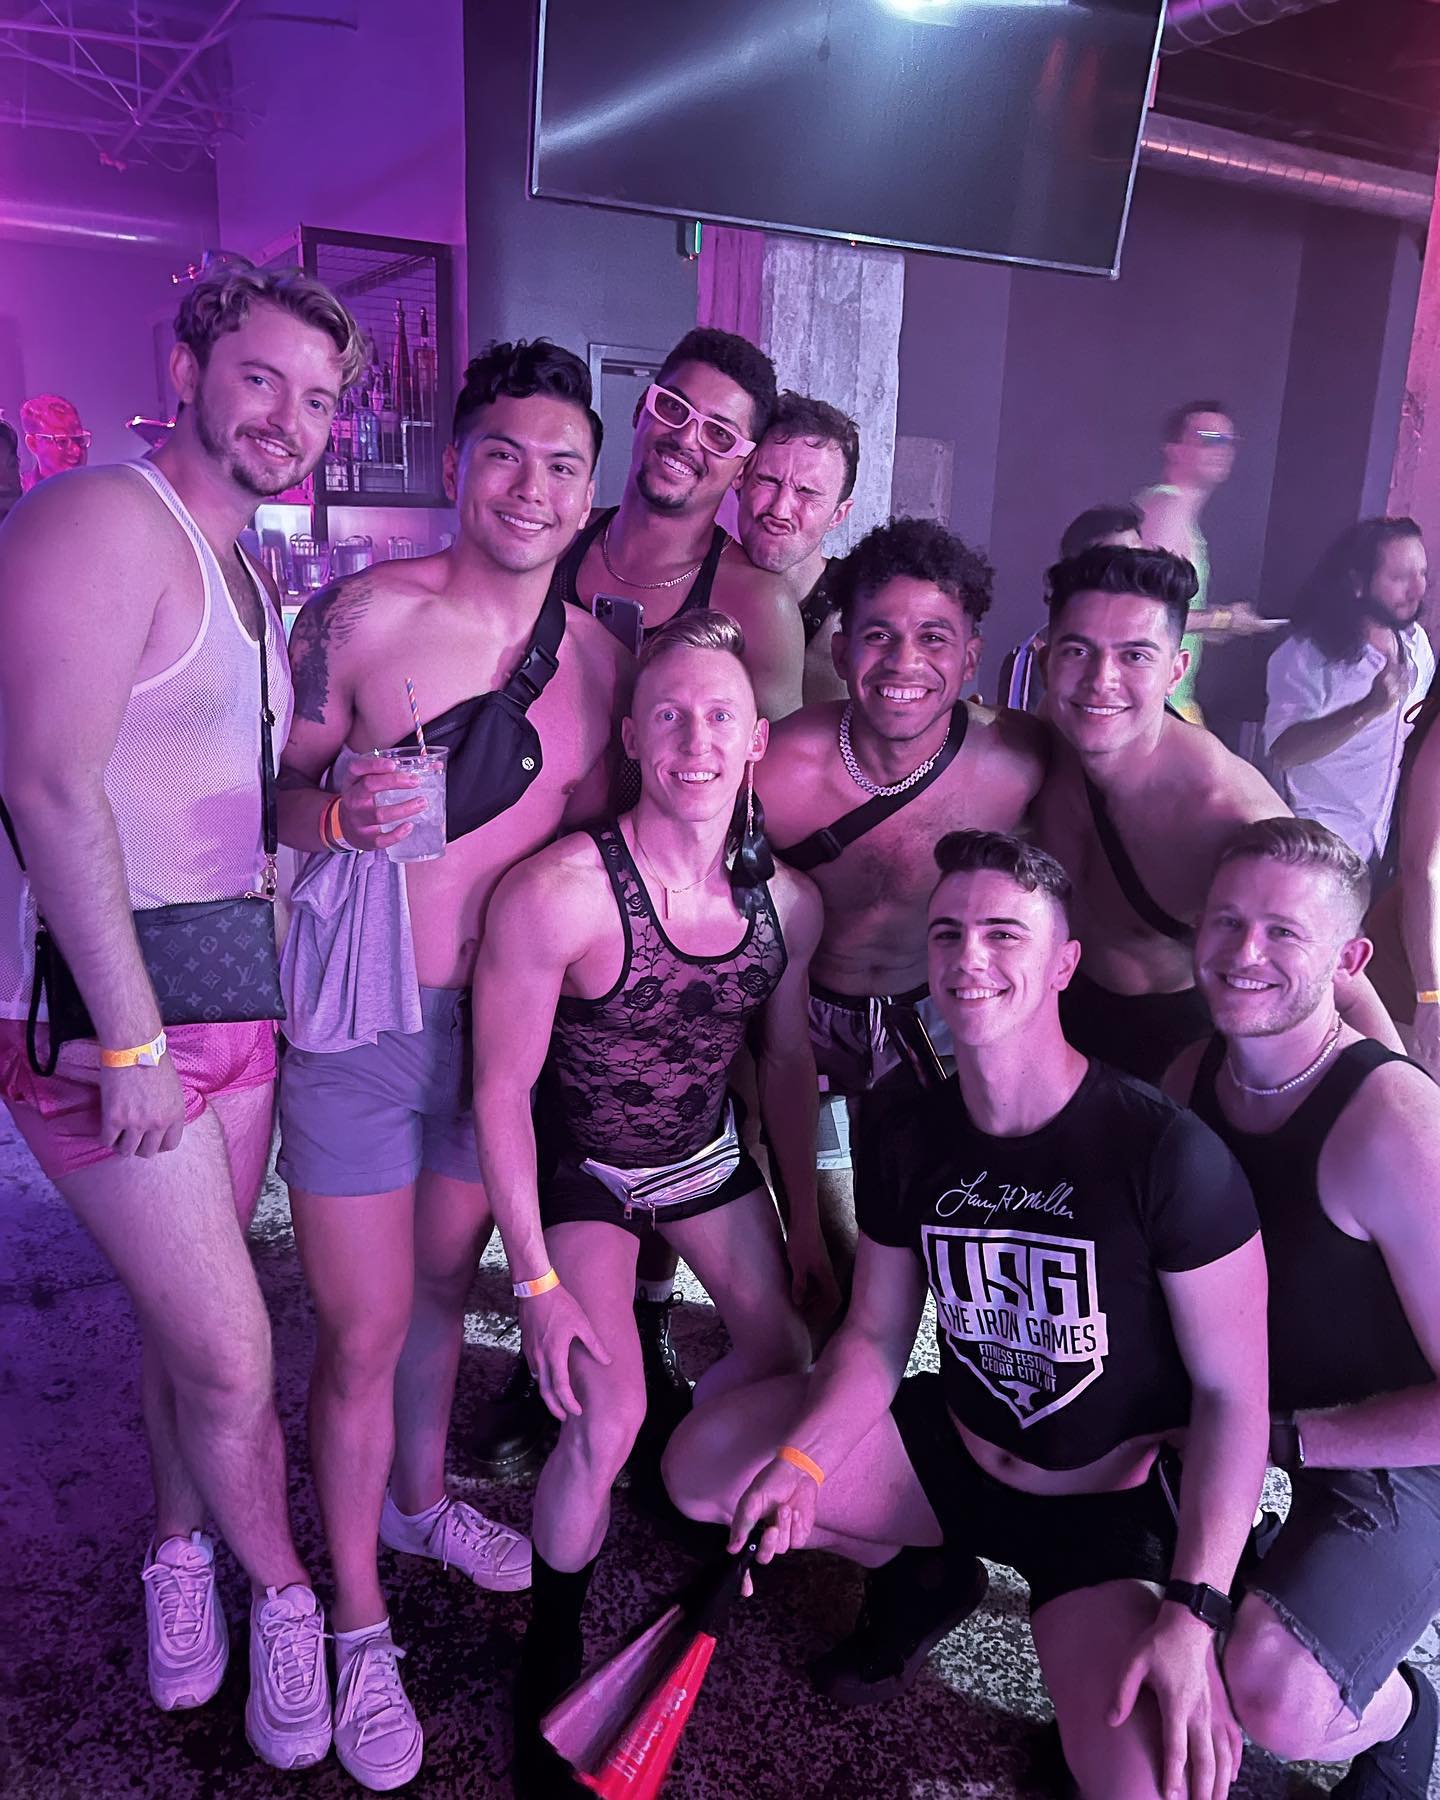 HI GAY 🌈💅🏻🍑💦🐴

My first ever pride was so amazing! Really appreciate the special and loving people I have in my life! Thank you for making this weekend one to remember! 

#pride #lgbt #gay #gayman #gayboy #gaymuscle #gayparty #gaymen #gaylife #pridemonth #pride🌈 #celebration #party #gayparty